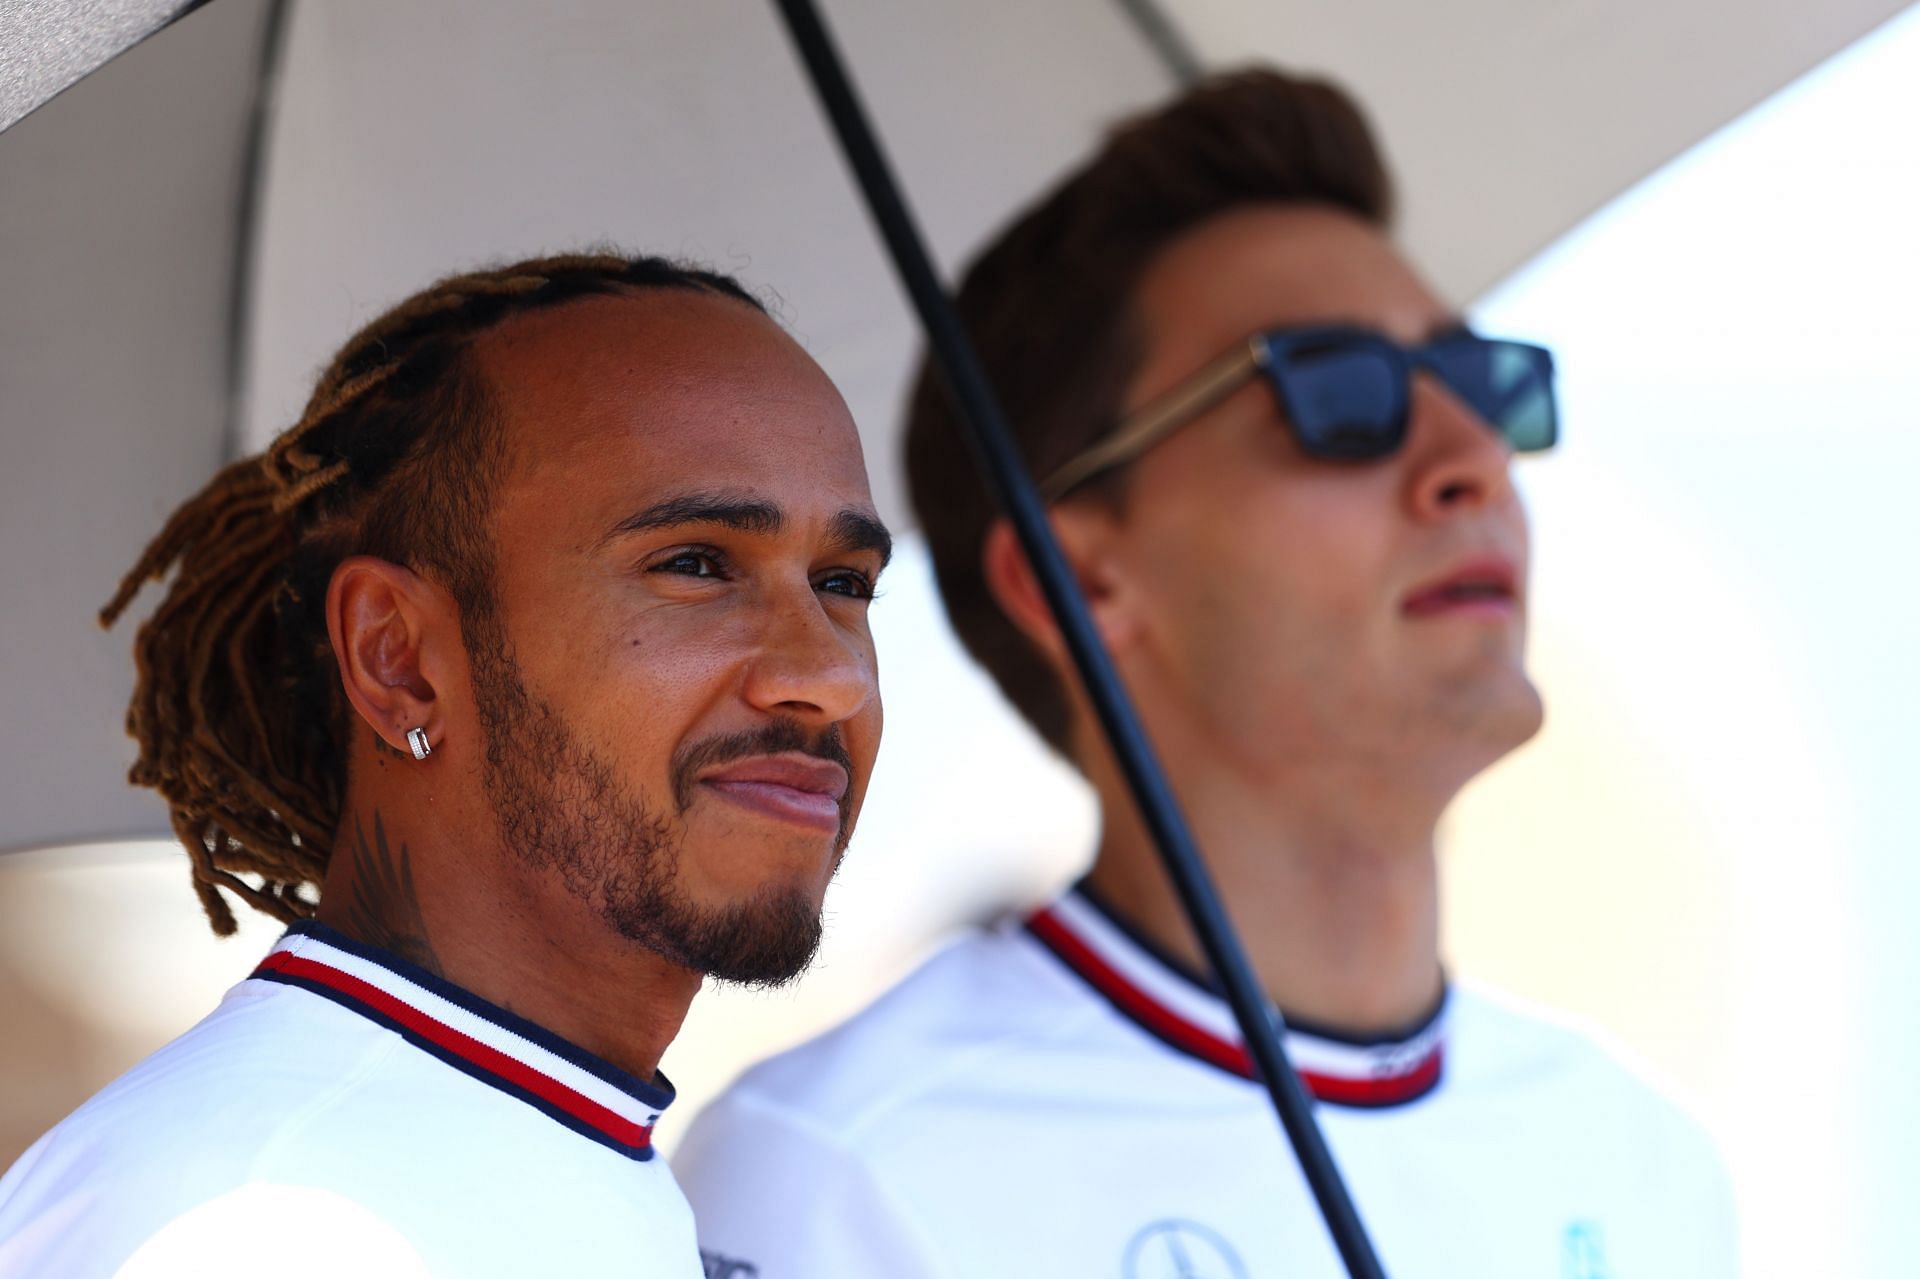 Lewis Hamilton has been outpaced by George Russell thus far this season